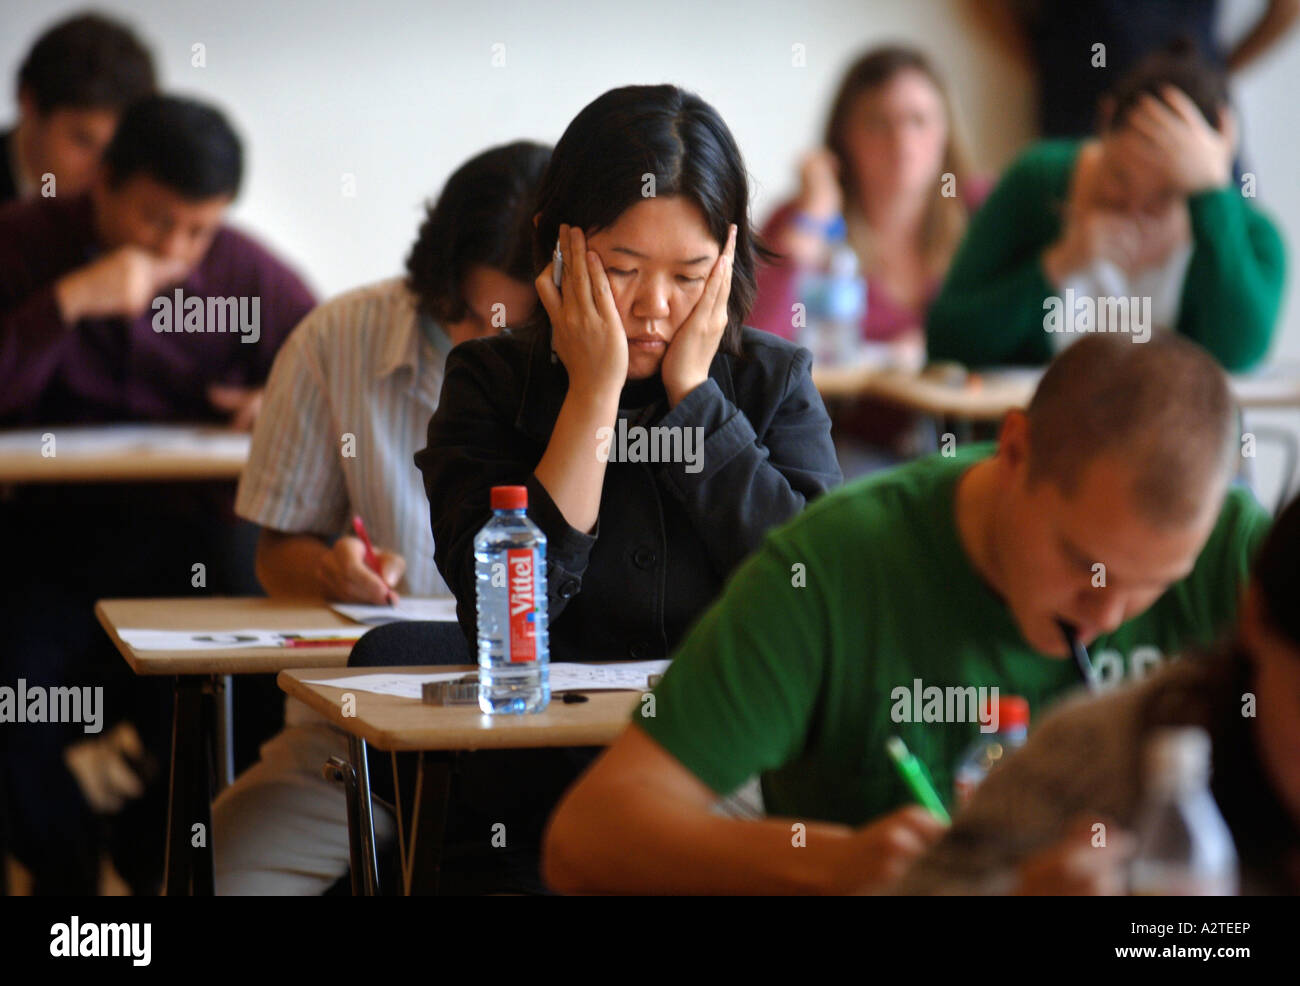 COMPETITORS AT GLOUCESTERSHIRE UNIVERSITY FOR THE TIMES LITERARY FESTIVAL SU DOKU CHAMPIONSHIPS OCT 2006 Stock Photo